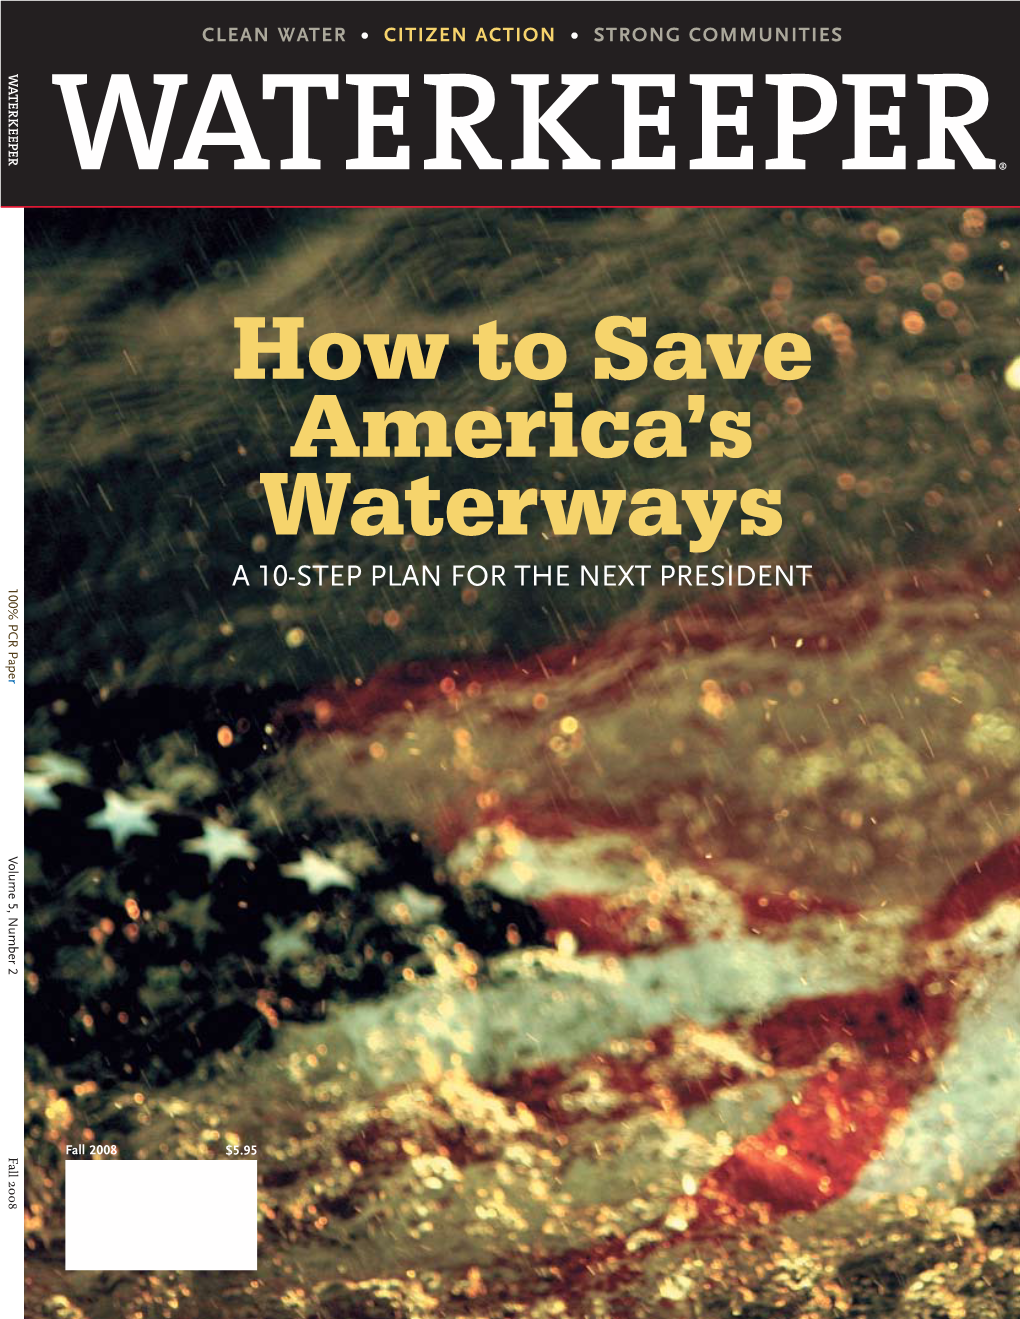 How to Save America's Waterways